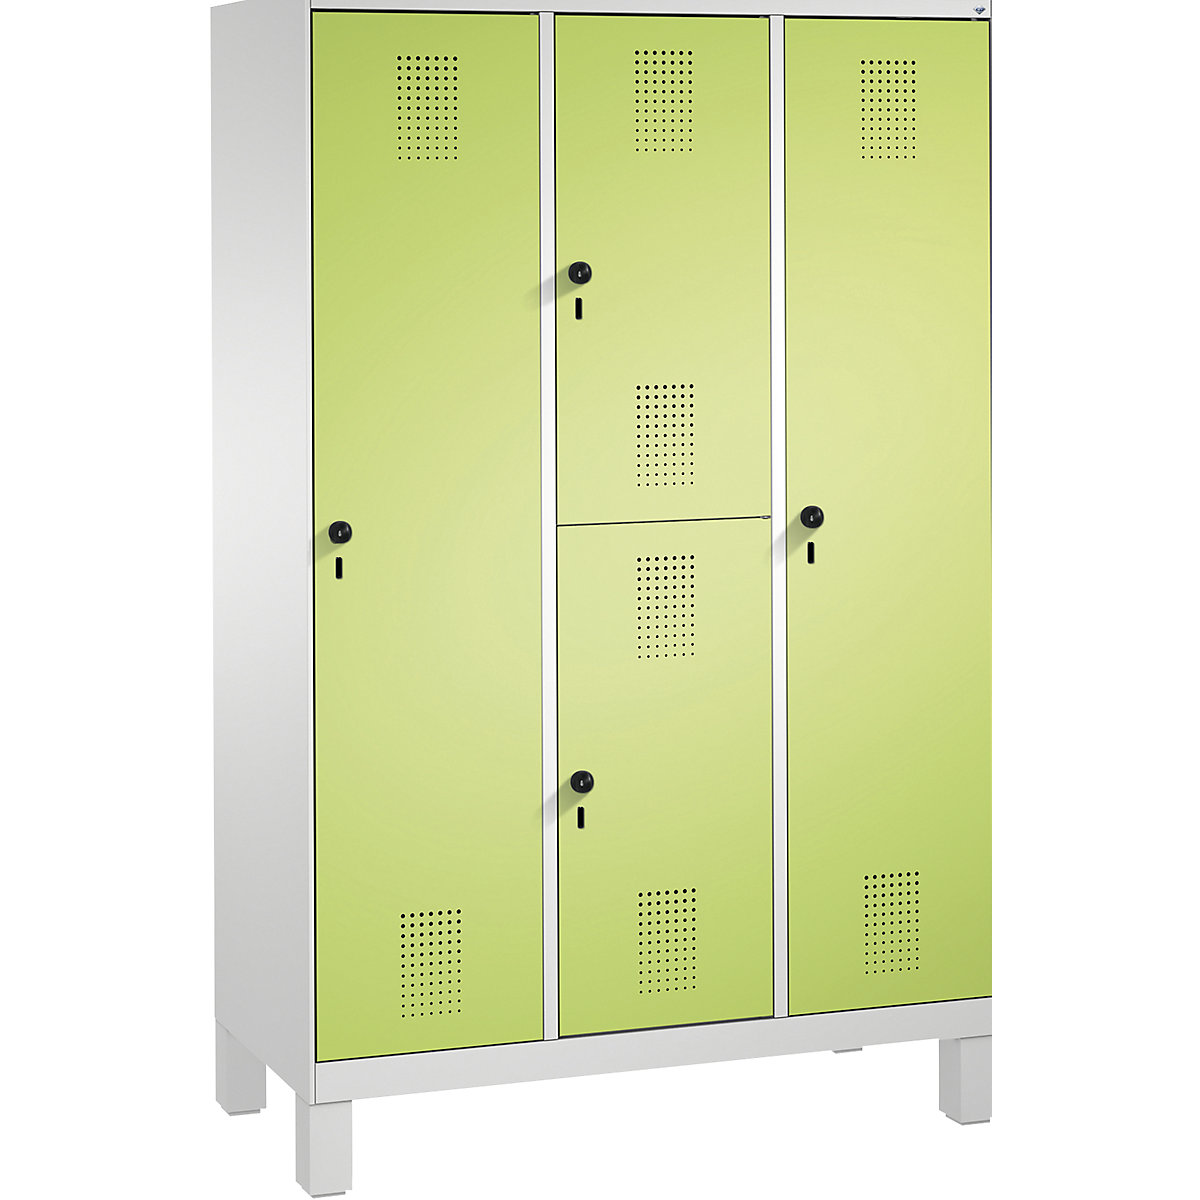 EVOLO combination cupboard, single and double tier – C+P, 3 compartments, 4 doors, compartment width 400 mm, with feet, light grey / viridian green